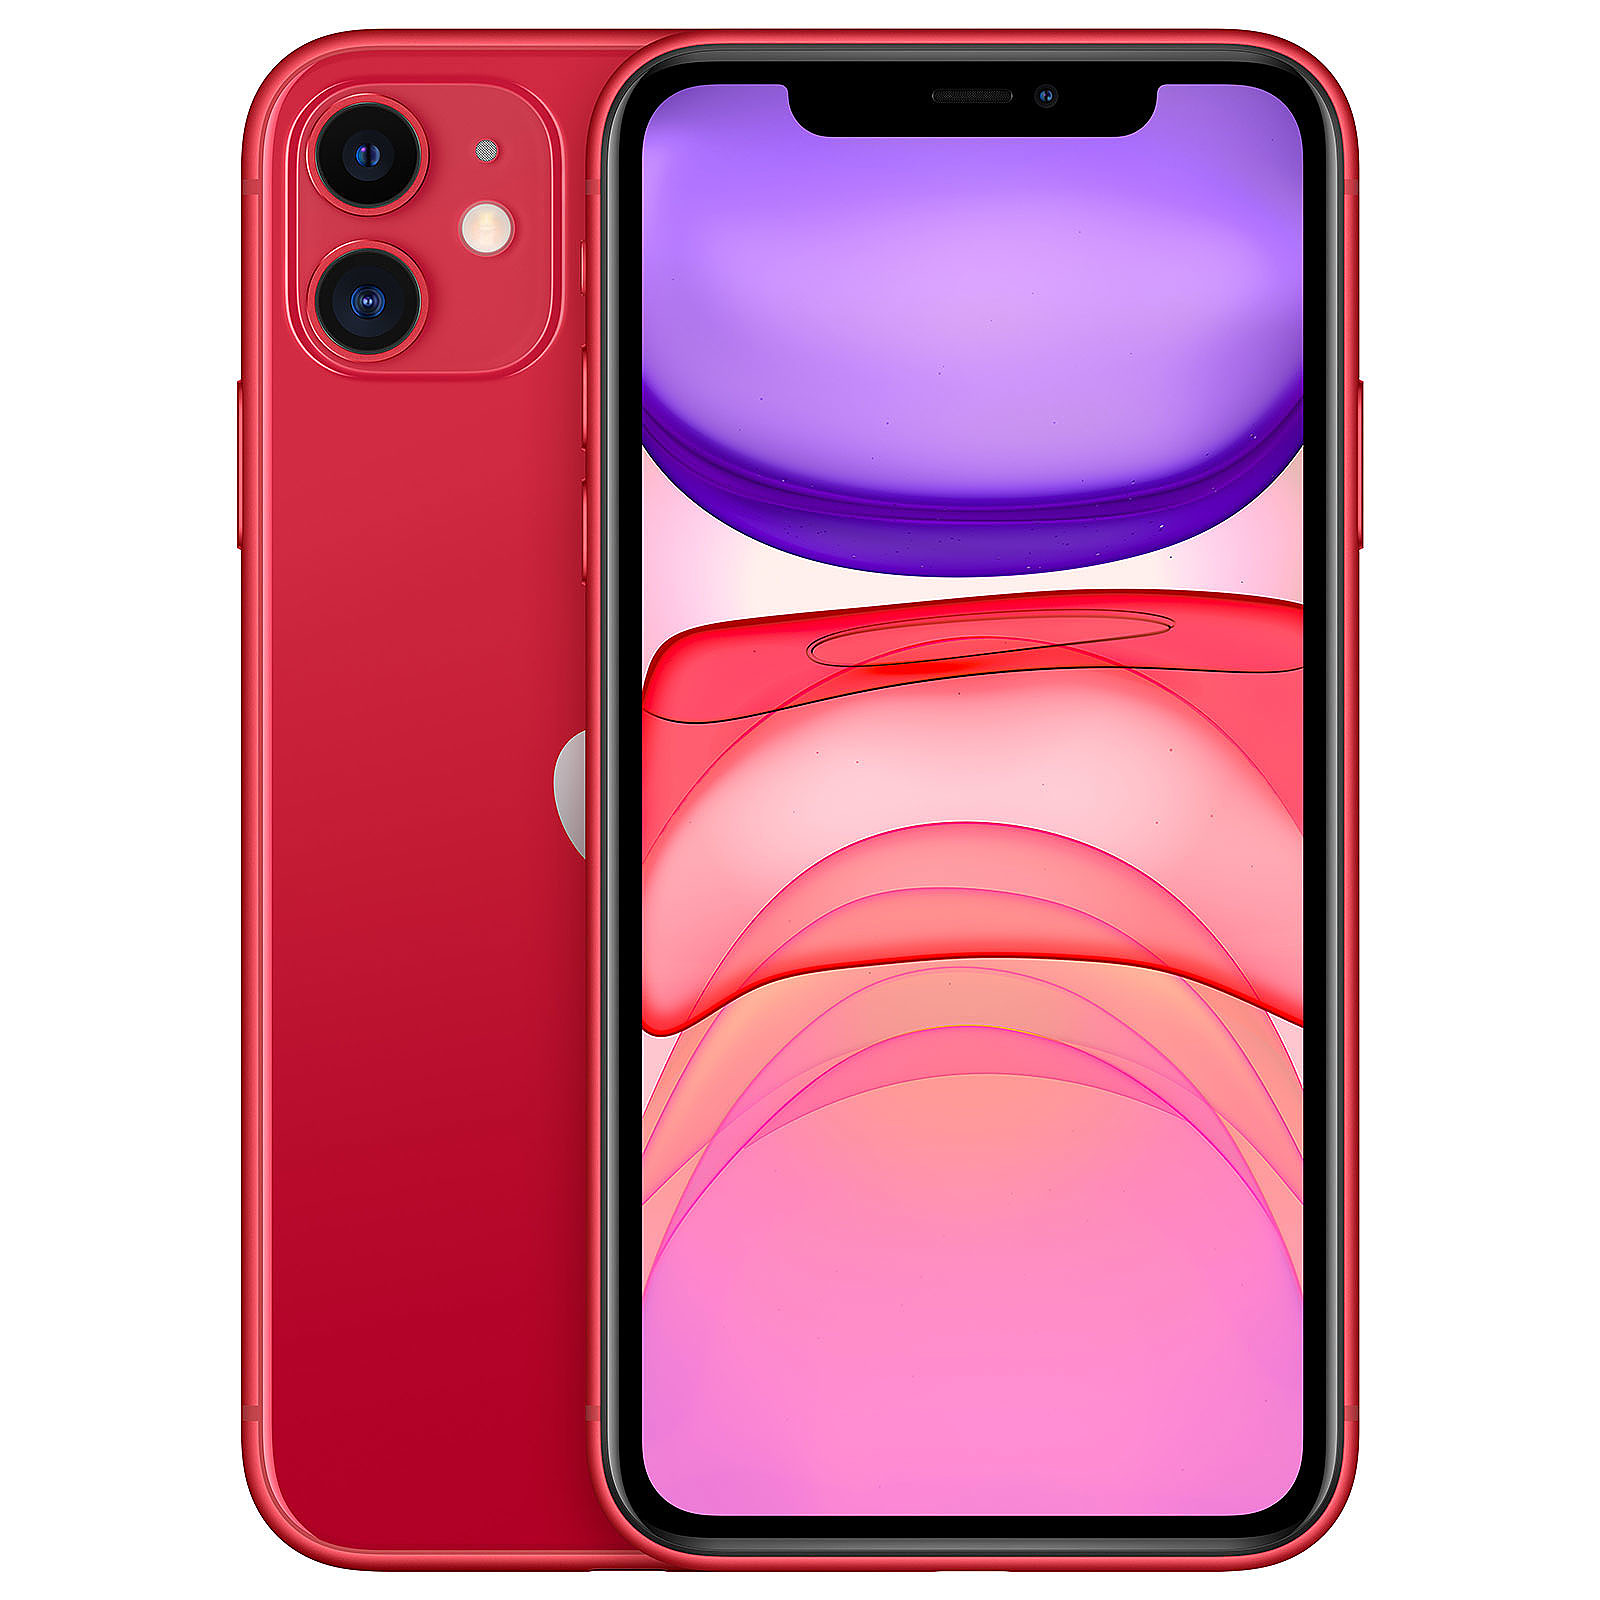 Apple iPhone 11 128 Go (PRODUCT)RED · Reconditionne - Smartphone reconditionne Apple